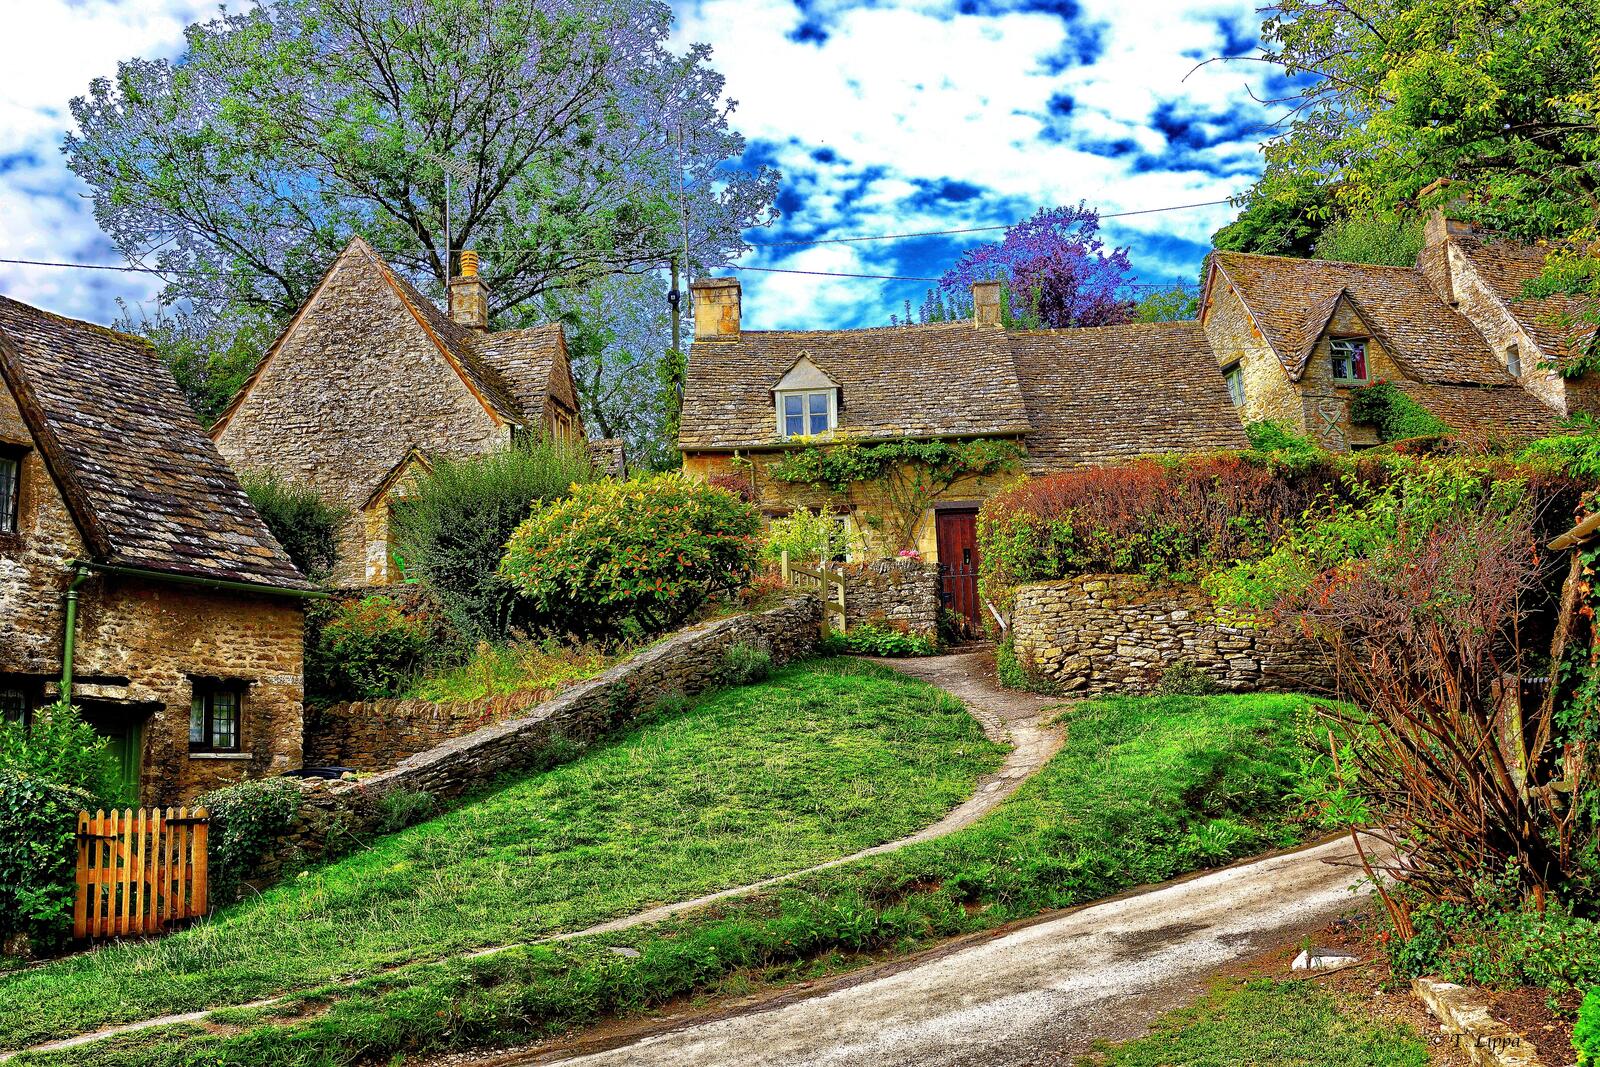 Wallpapers houses Cotswolds England on the desktop